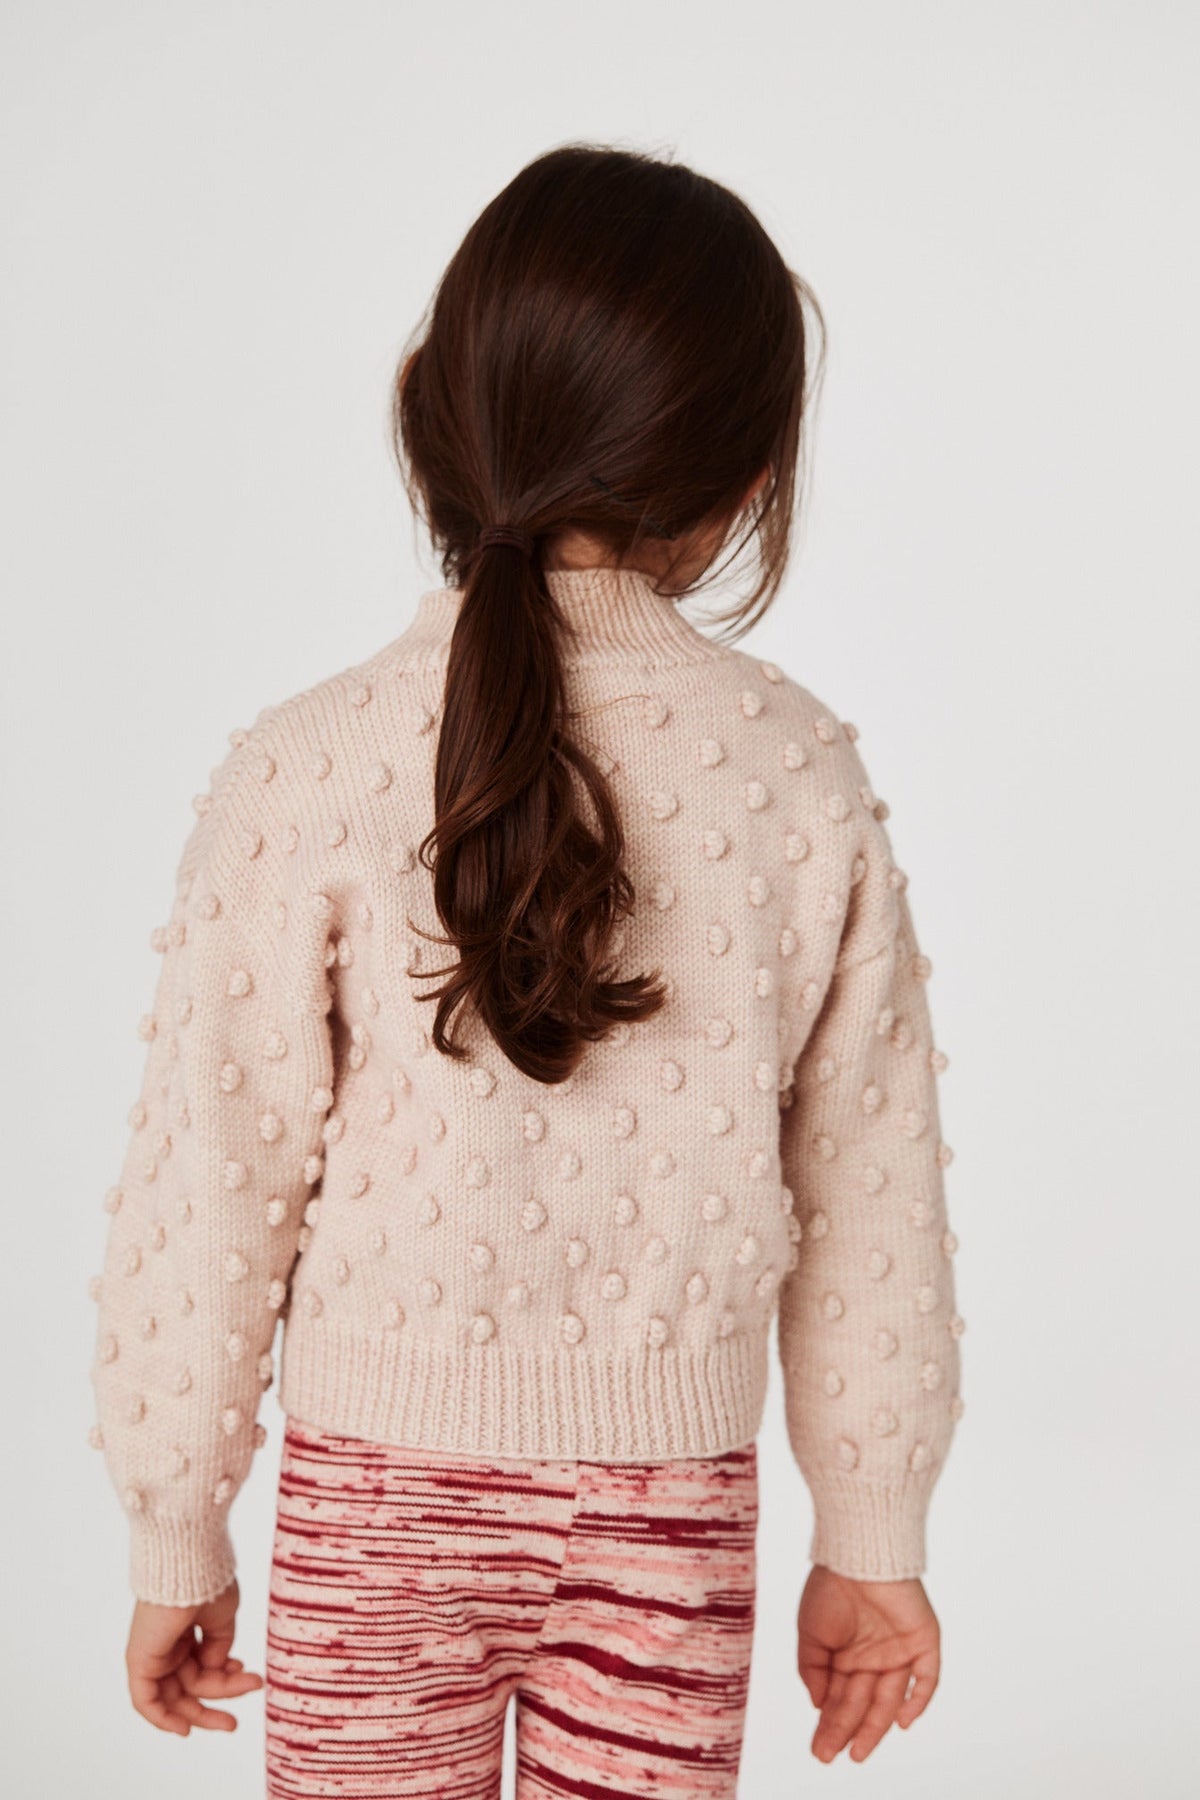 Mock Neck Popcorn Sweater - Dune+Model is 45 inches tall, 40lbs, wearing a size 4y